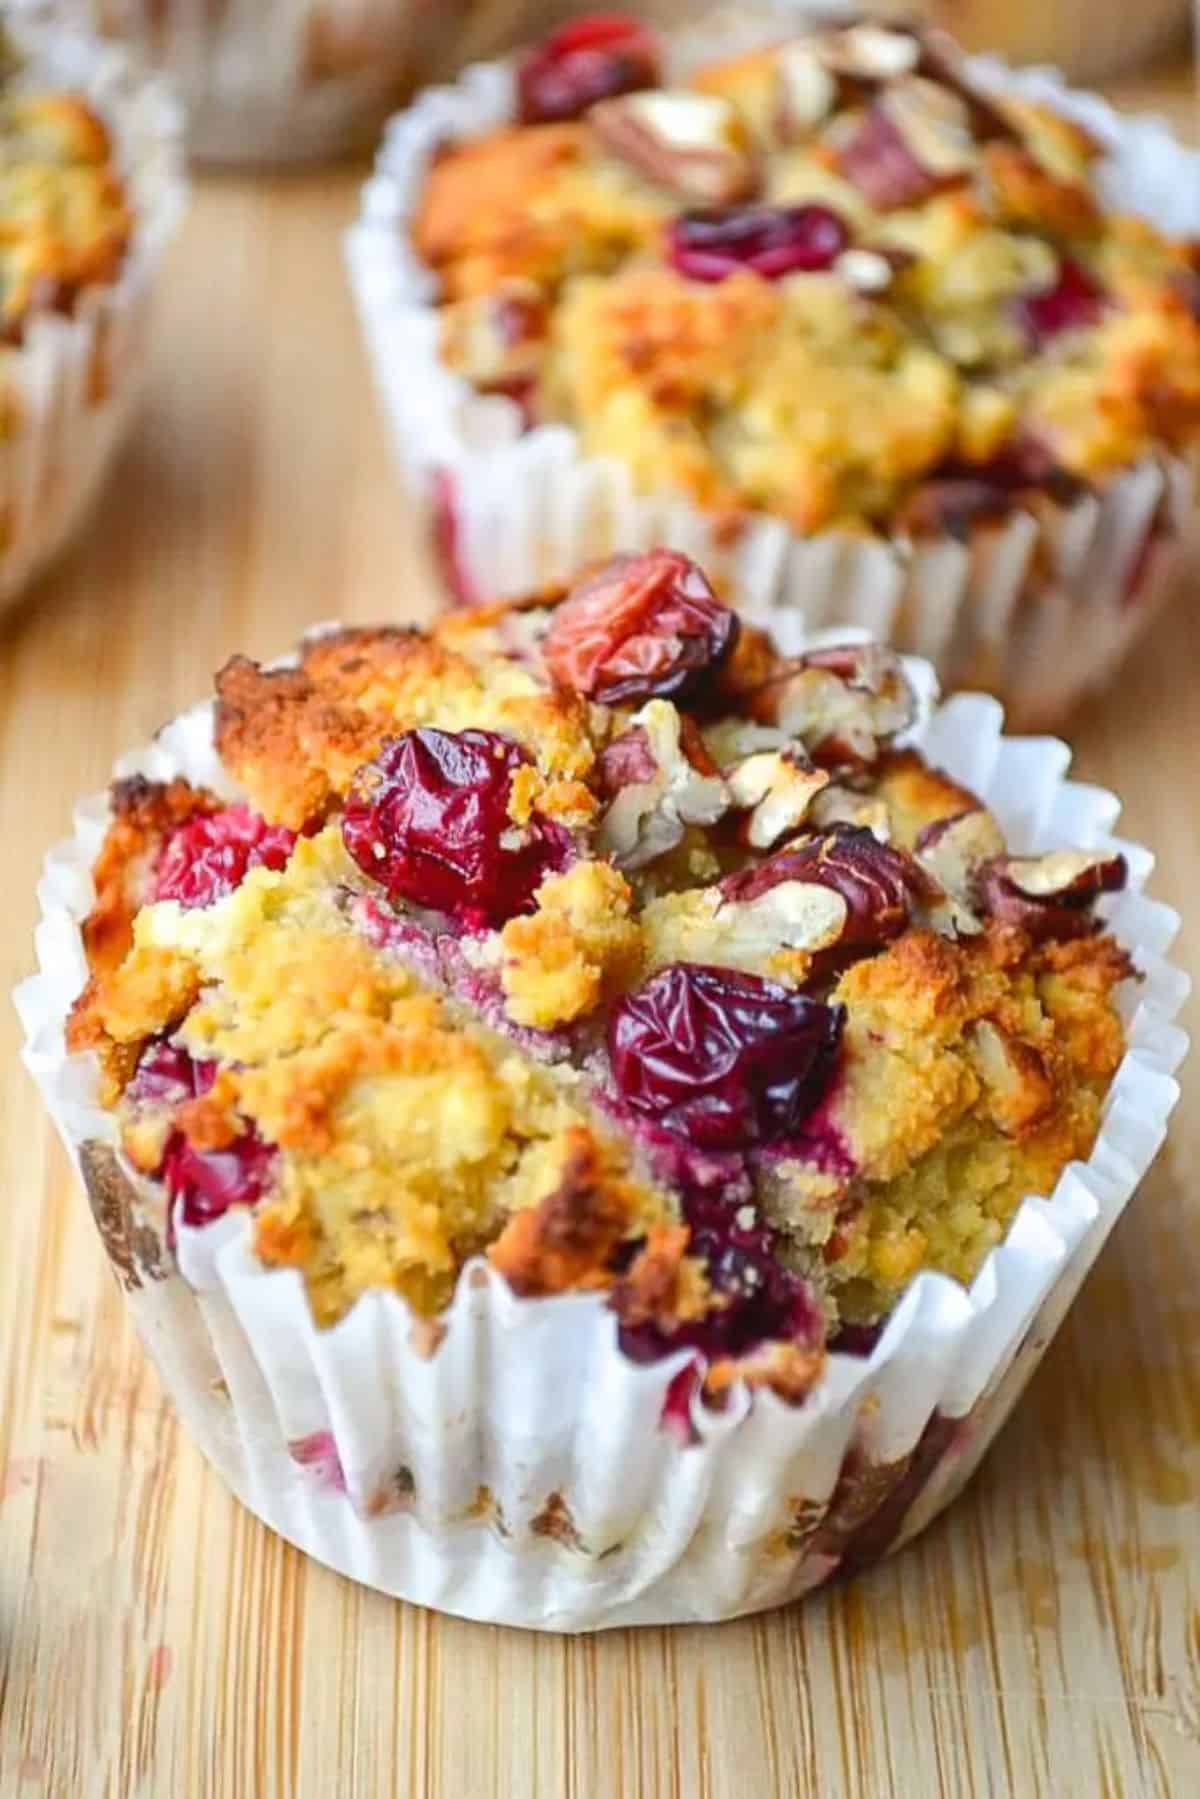 Delicious Gluten-Free Cranberry, Orange, and Pecan Muffins on a wooden table.